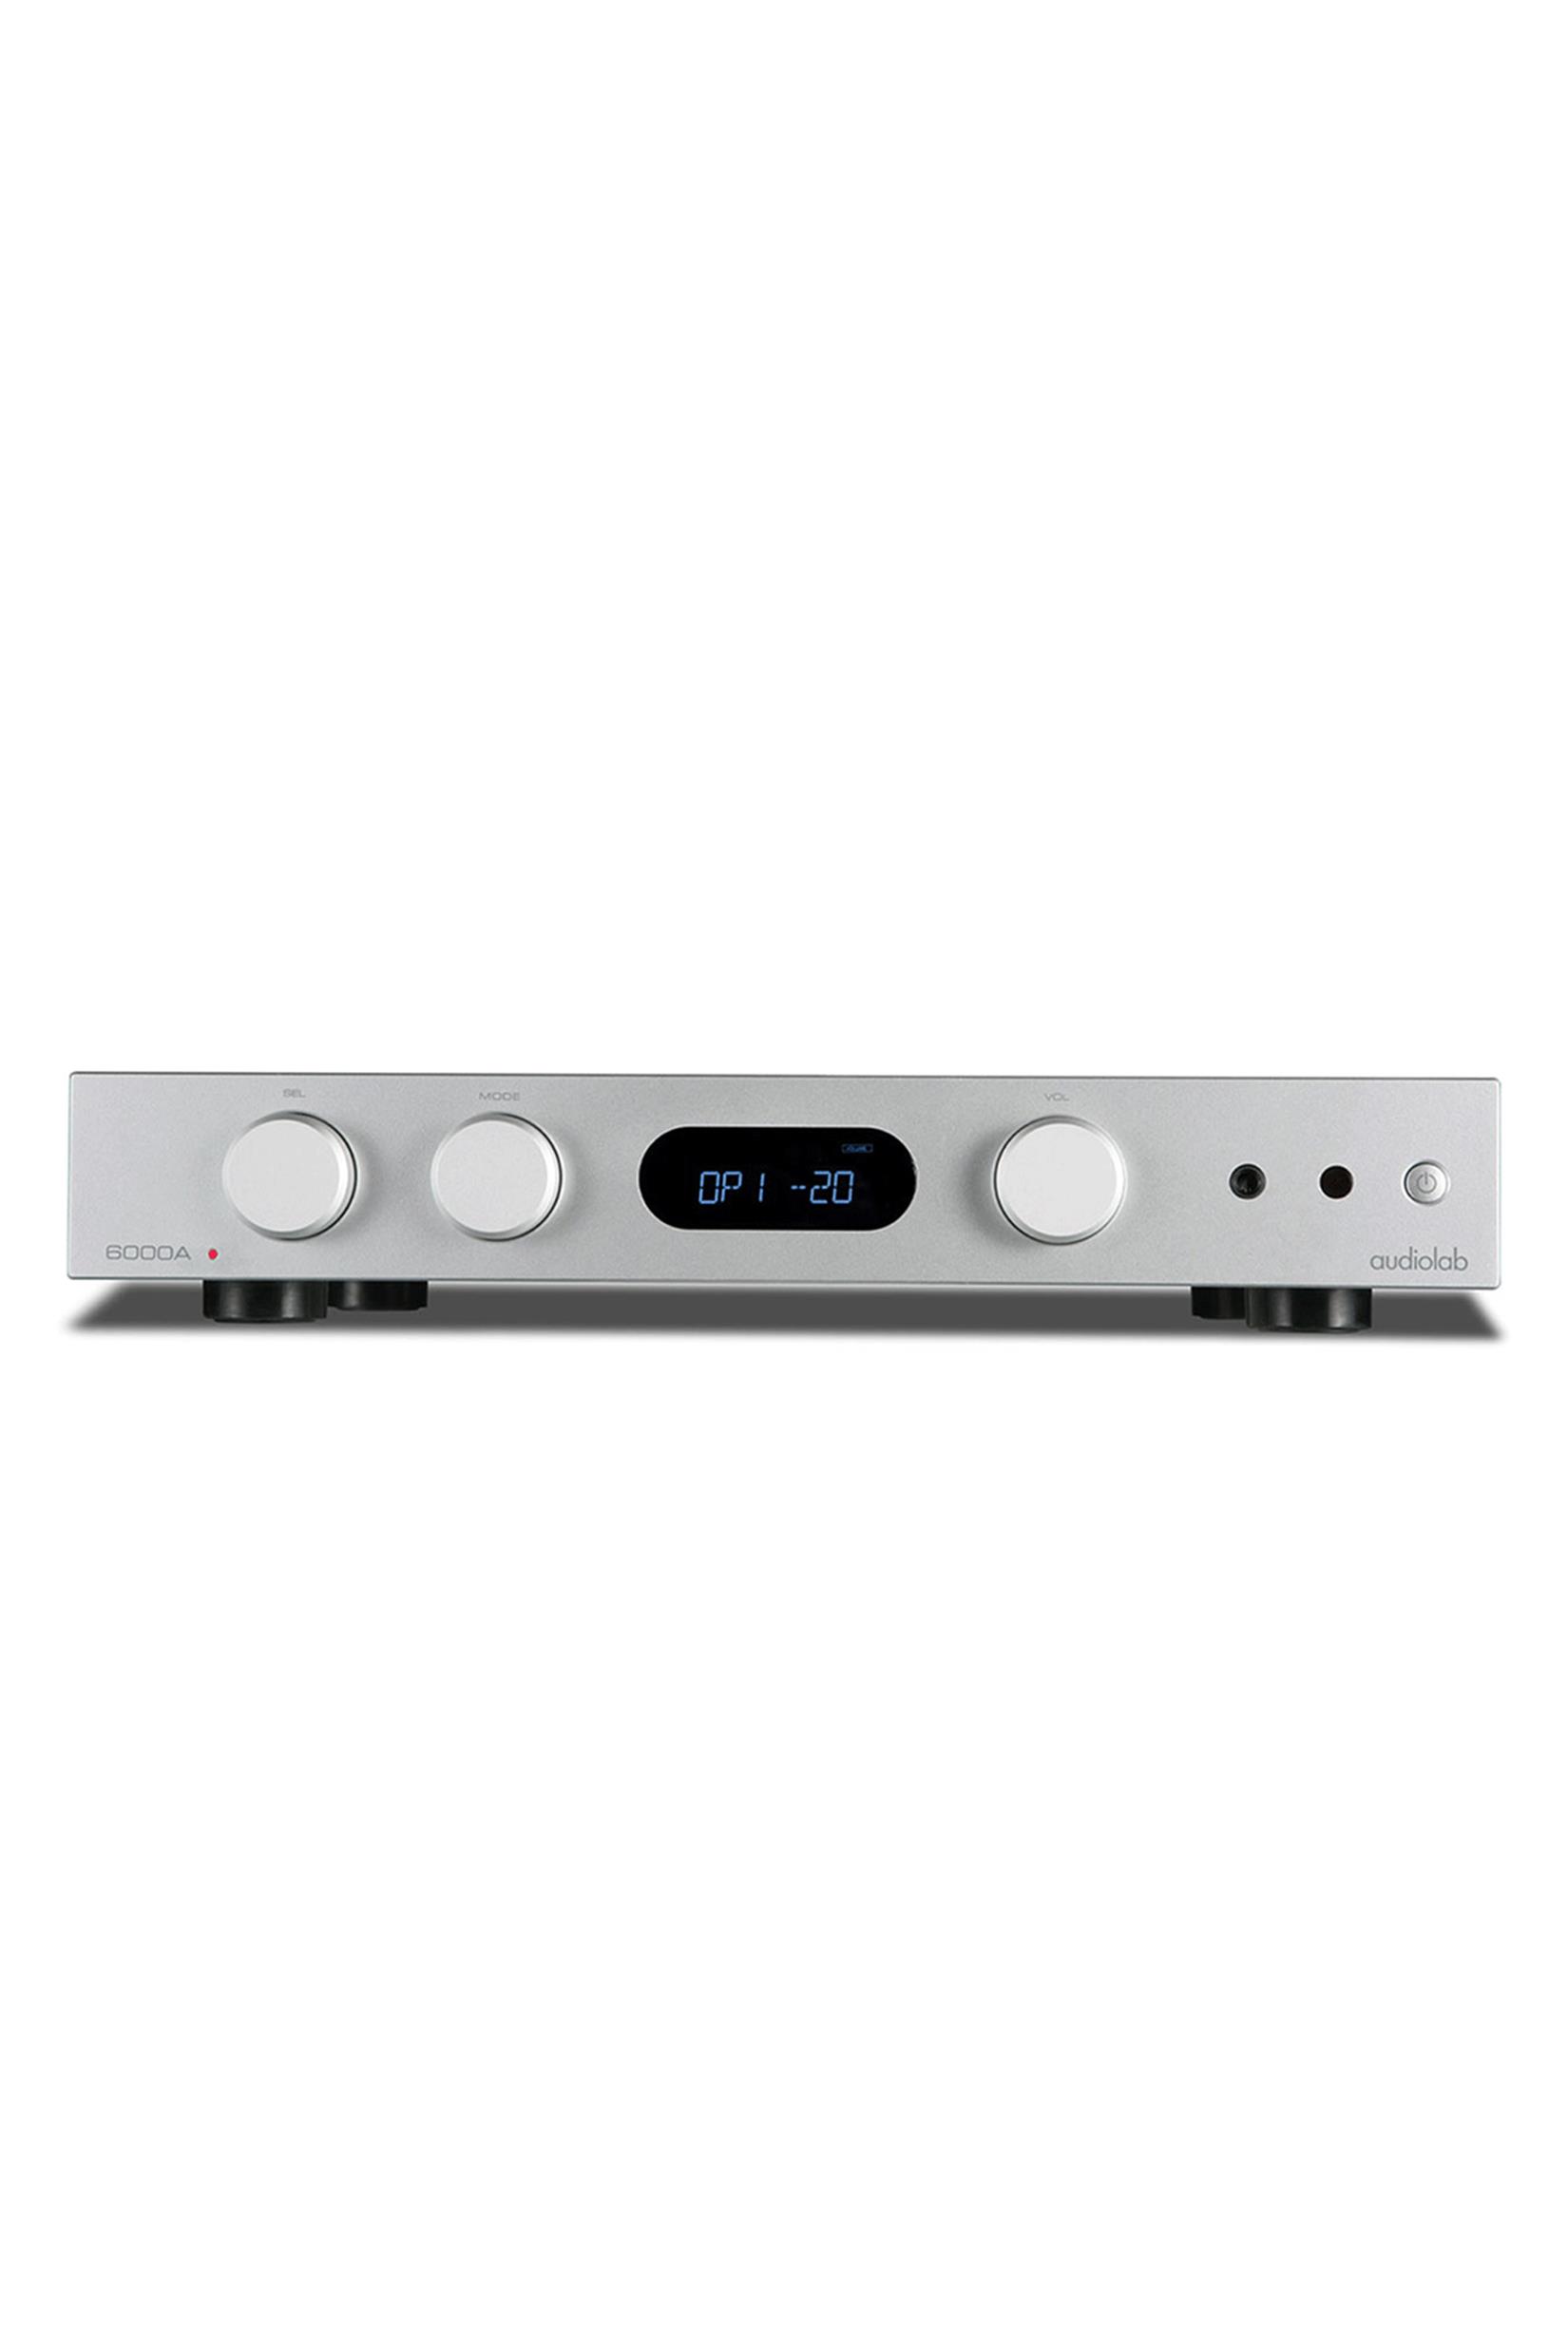 Audiolab 6000A 2-Channel Integrated Amp (Silver) - image 2 of 4